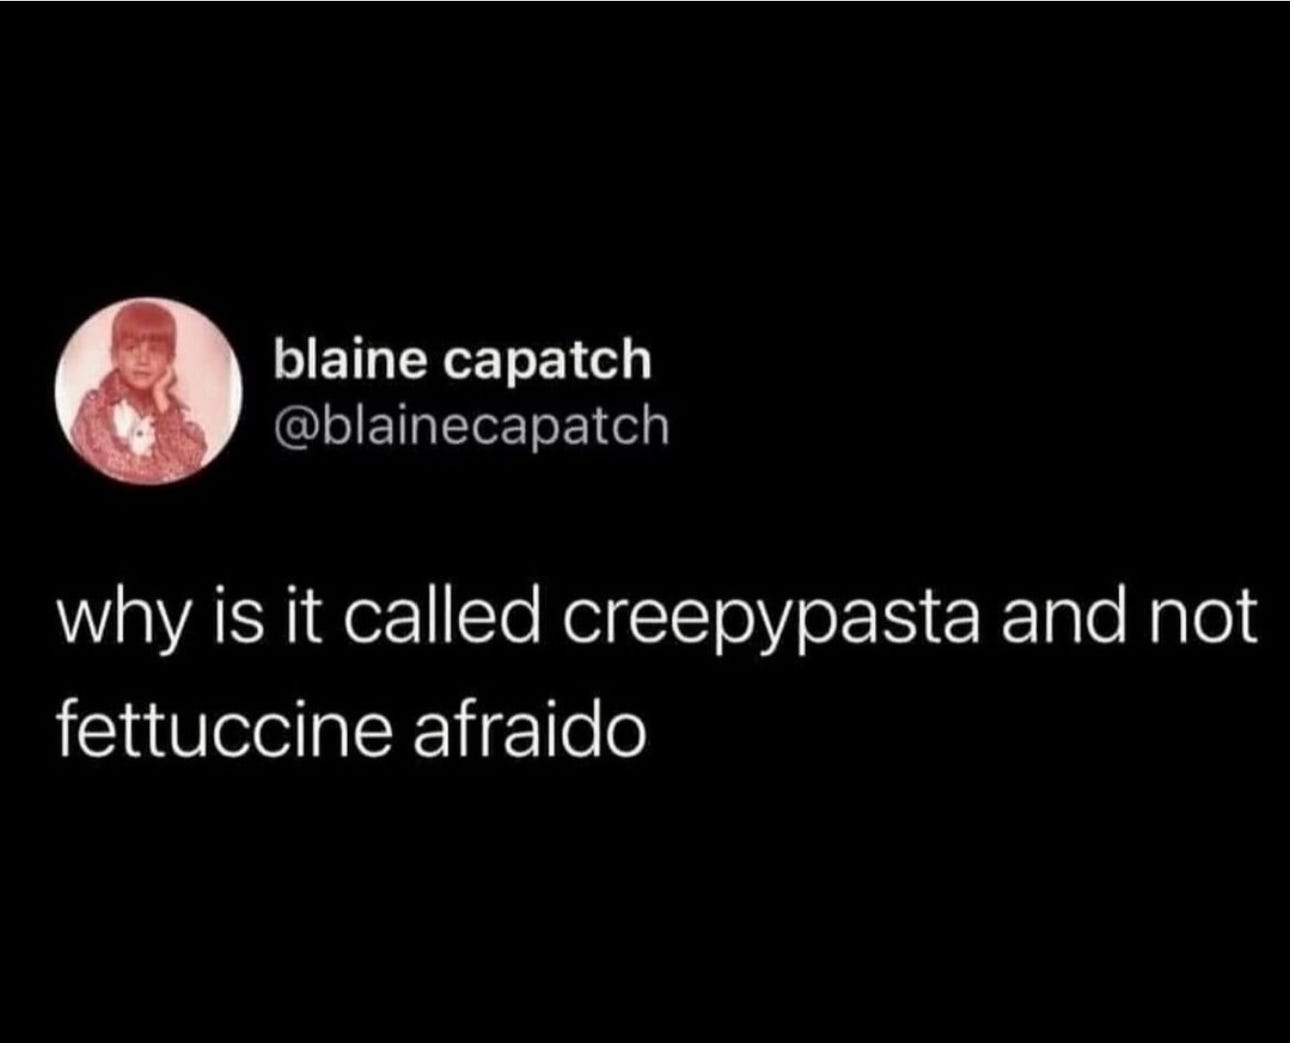 @blainecapatch: why is it called creepypasta and not fettuccine afraido